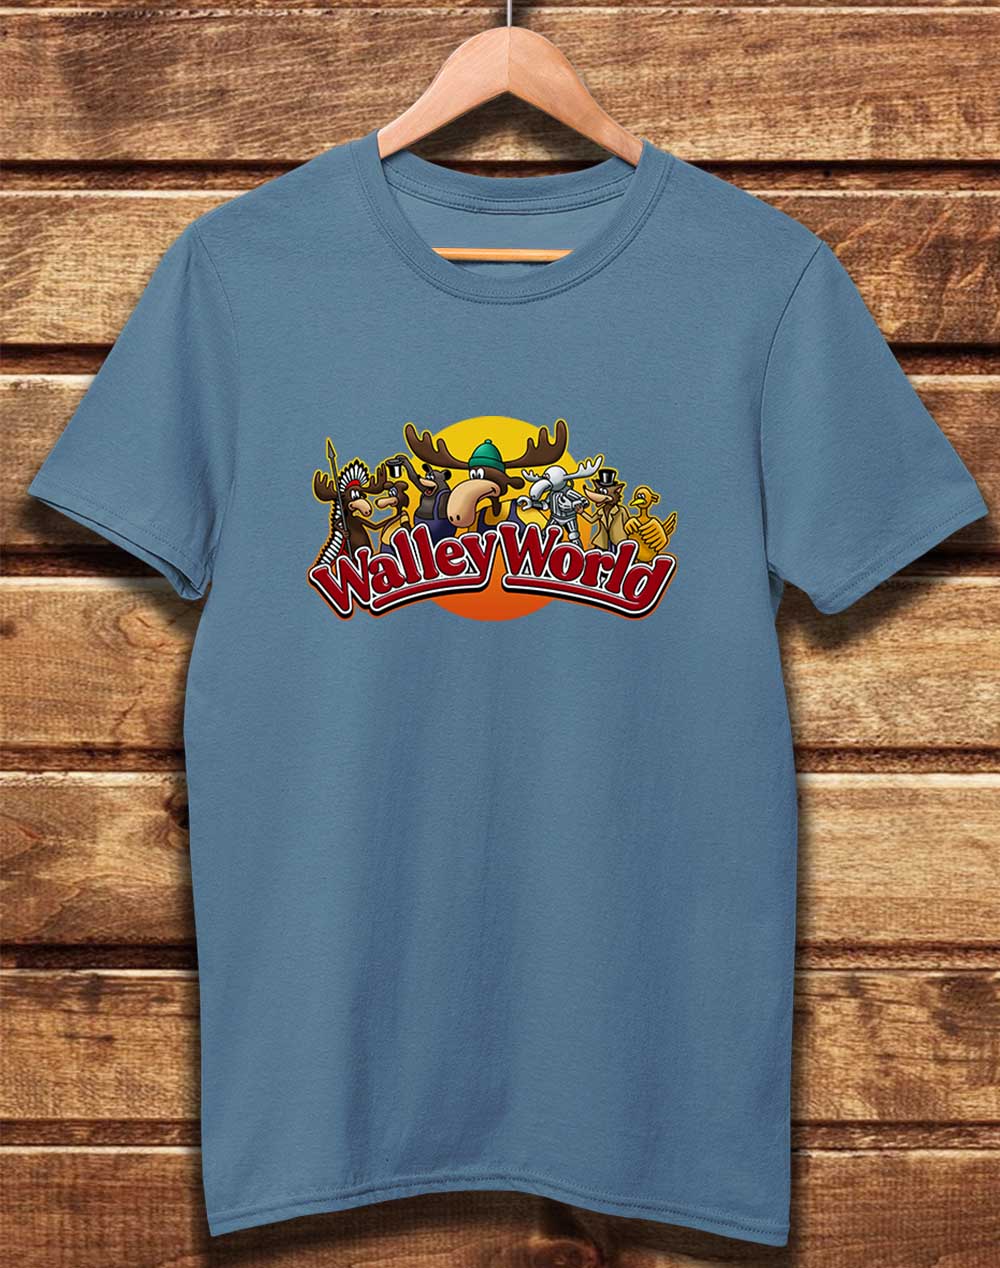 Faded Denim - DELUXE Walley World Organic Cotton T-Shirt